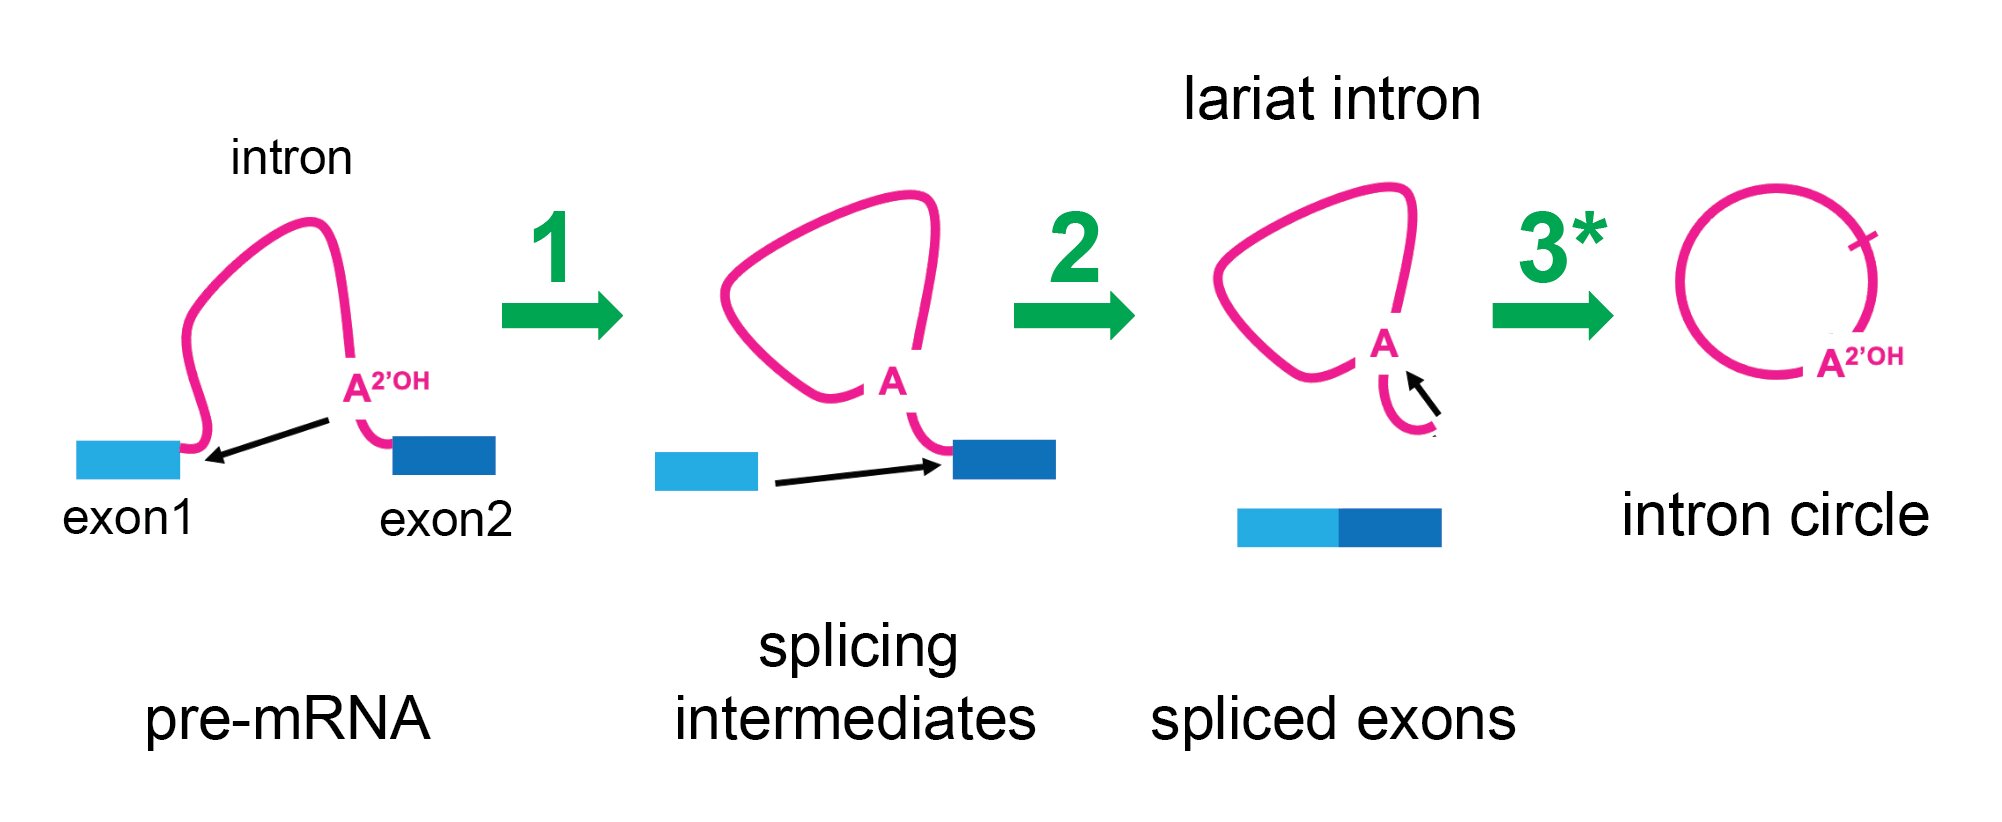 New Discoveries in Spliceosome Function: Genome Modification, Nuclear Speckles, and a Fully Interpretable Model of Pre-mRNA Splicing